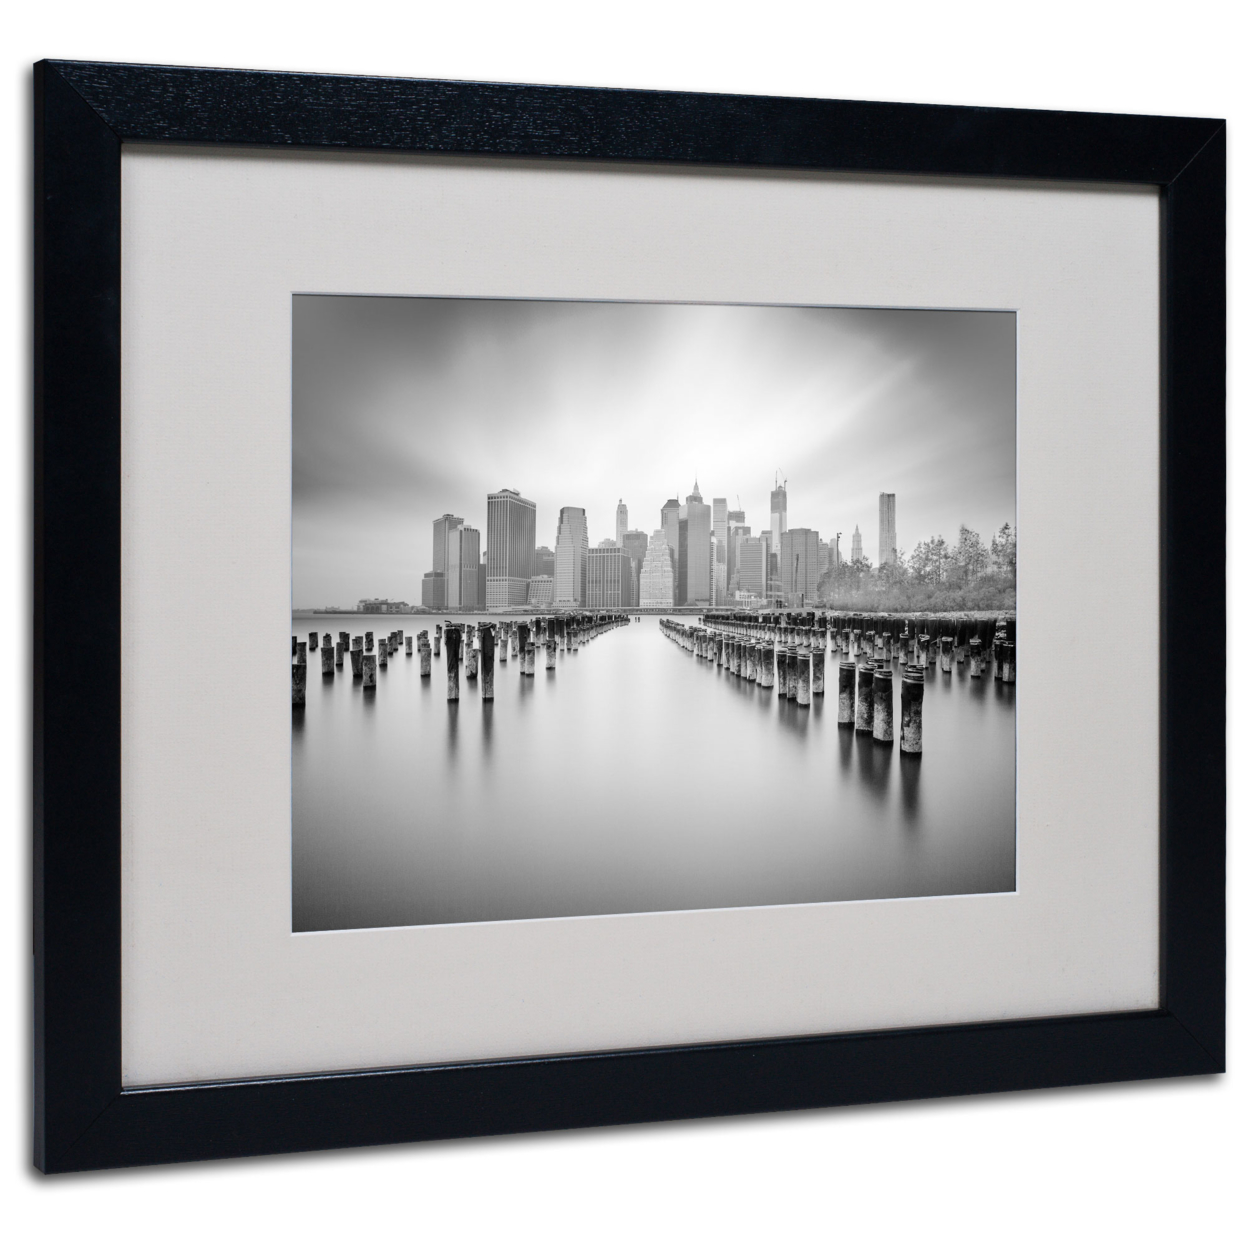 Moises Levy 'NYC 1' Black Wooden Framed Art 18 X 22 Inches